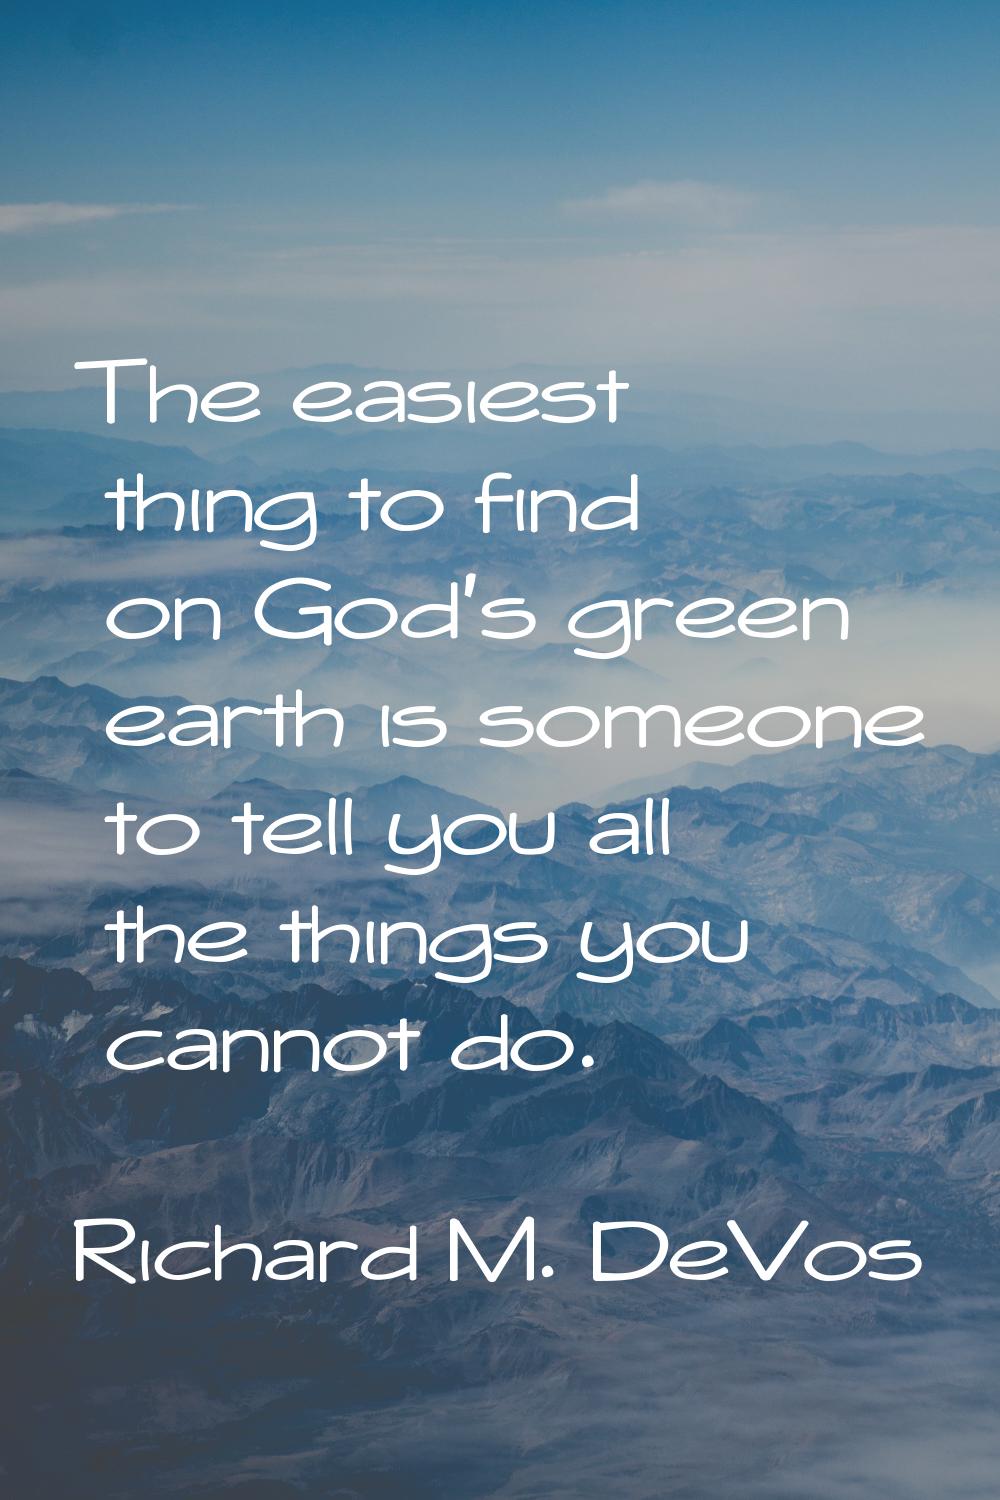 The easiest thing to find on God's green earth is someone to tell you all the things you cannot do.